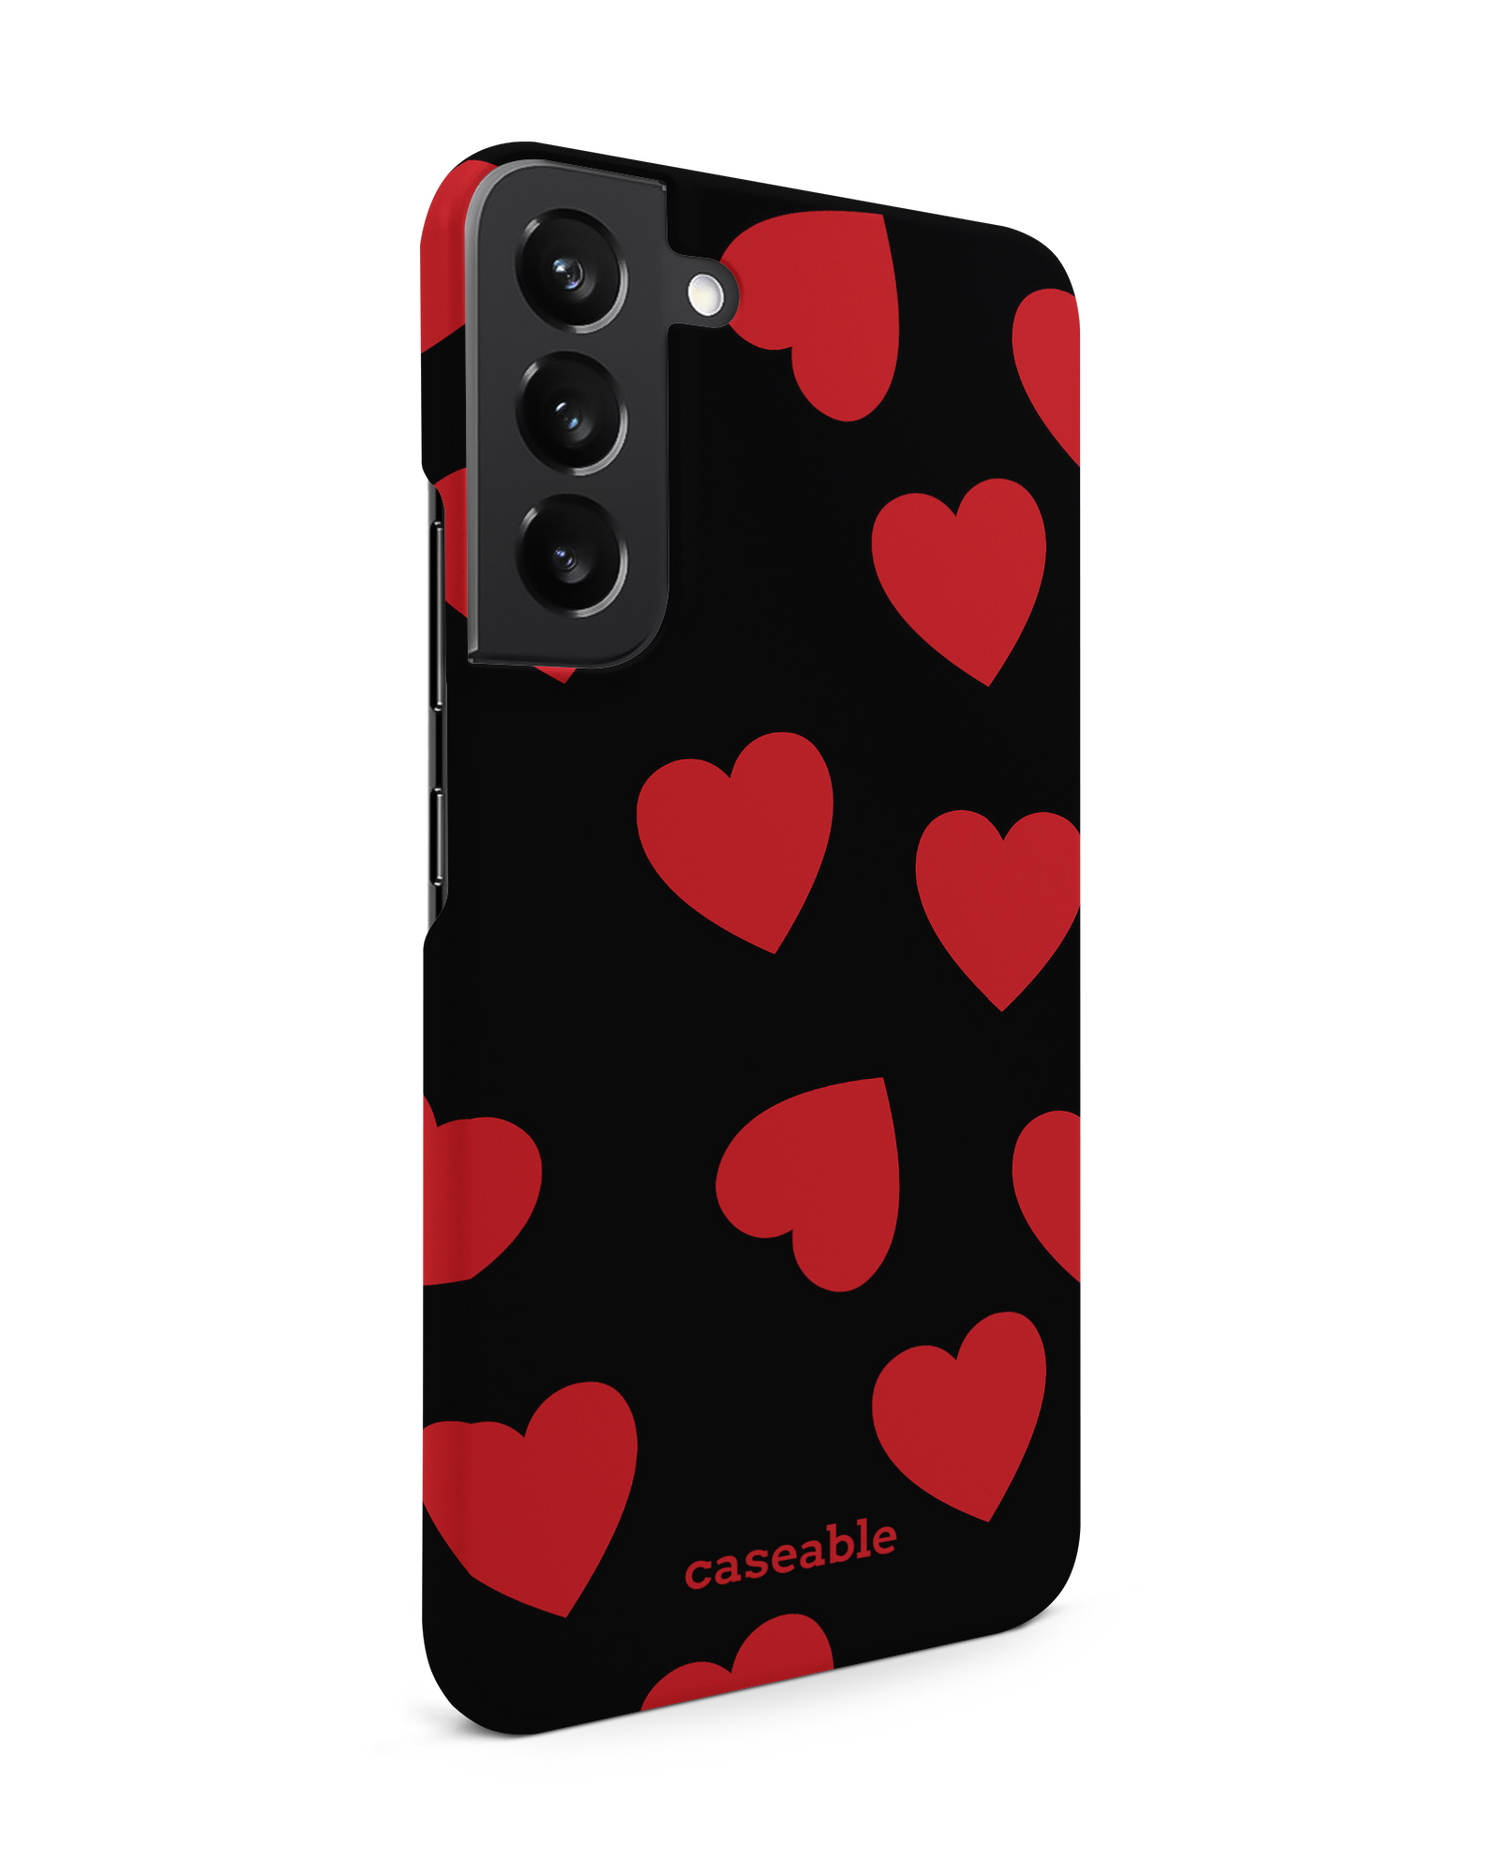 Repeating Hearts Hard Shell Phone Case Samsung Galaxy S22 Plus 5G: View from the left side